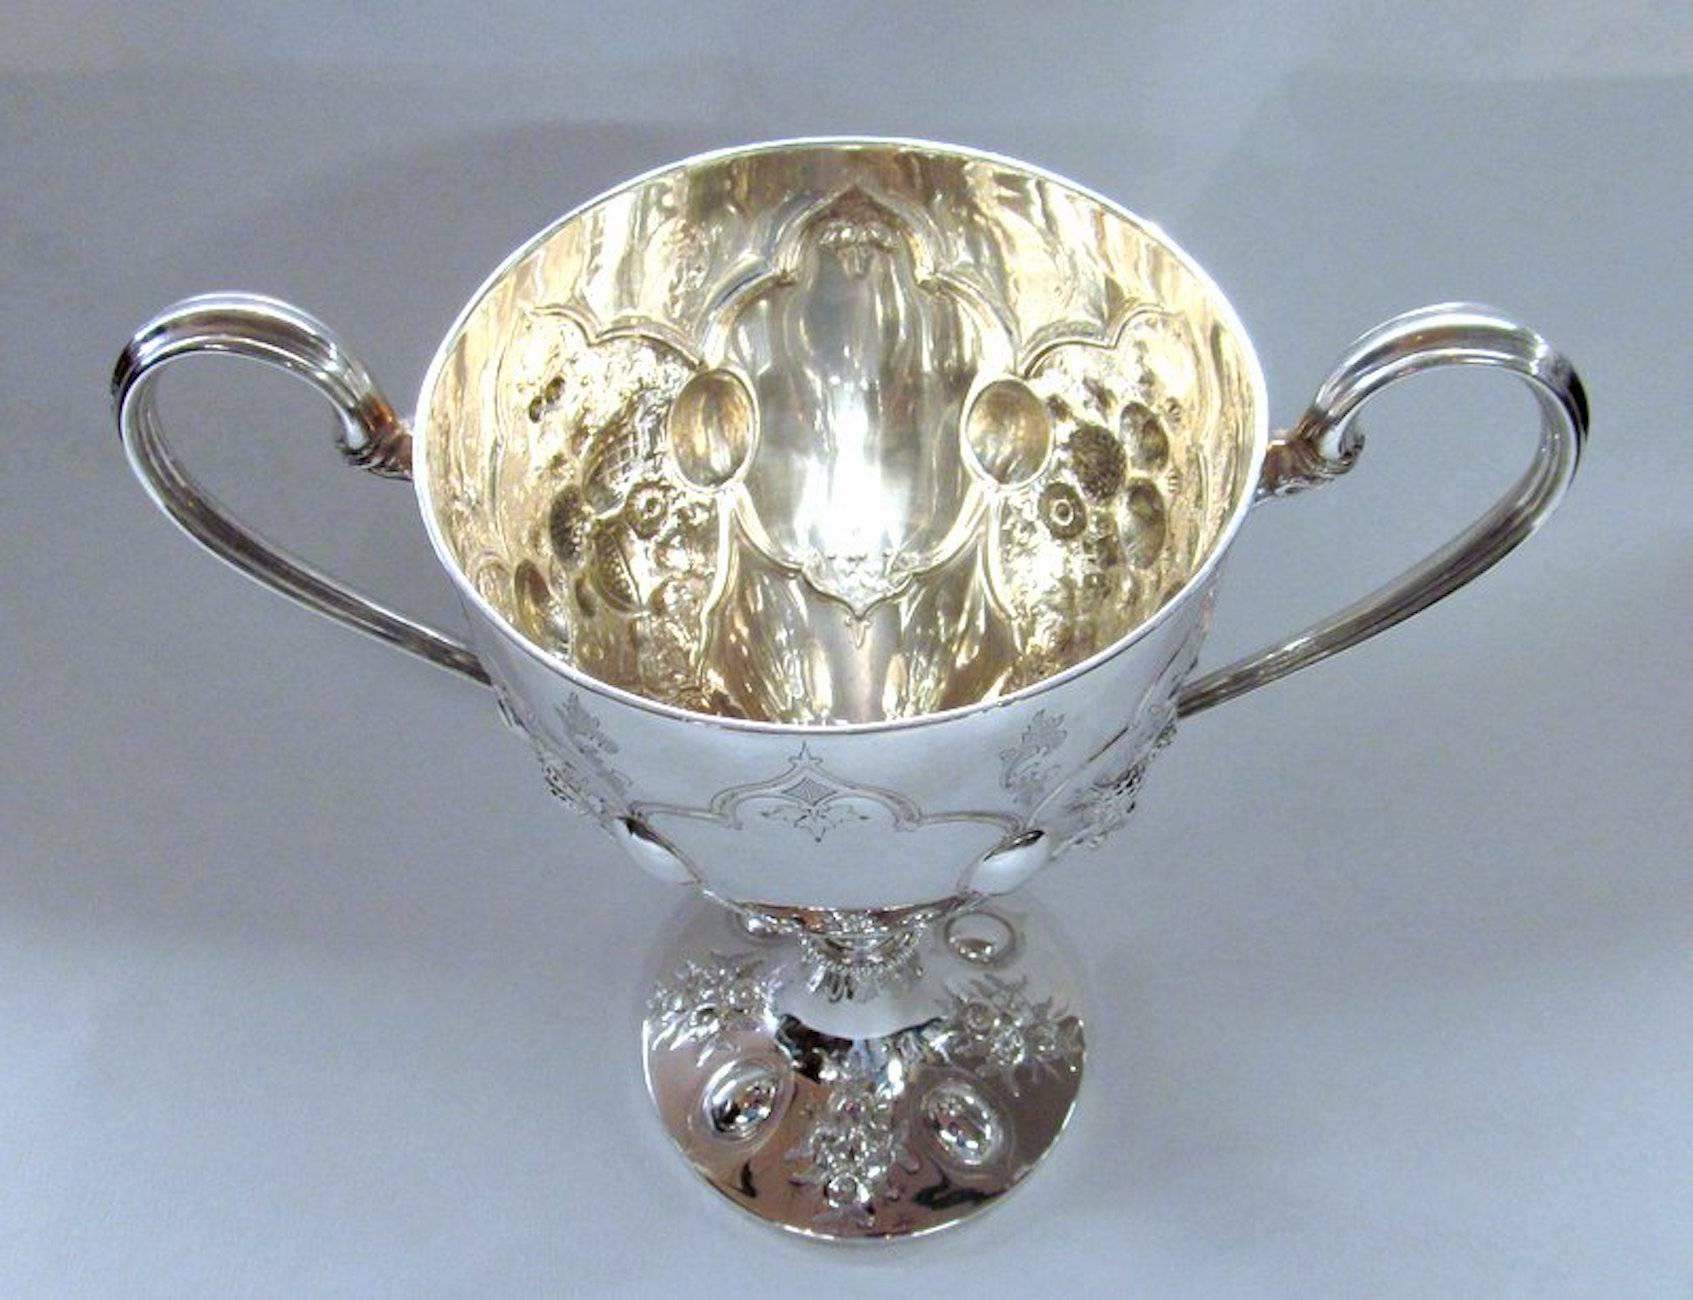 Fabulous large size heavy weight two-handle loving or trophy cup with engravable cartouche on either side (has never been inscribed).

Please note exceptionally hand chased strawberries and other fruit and leaves chased in bas relief.